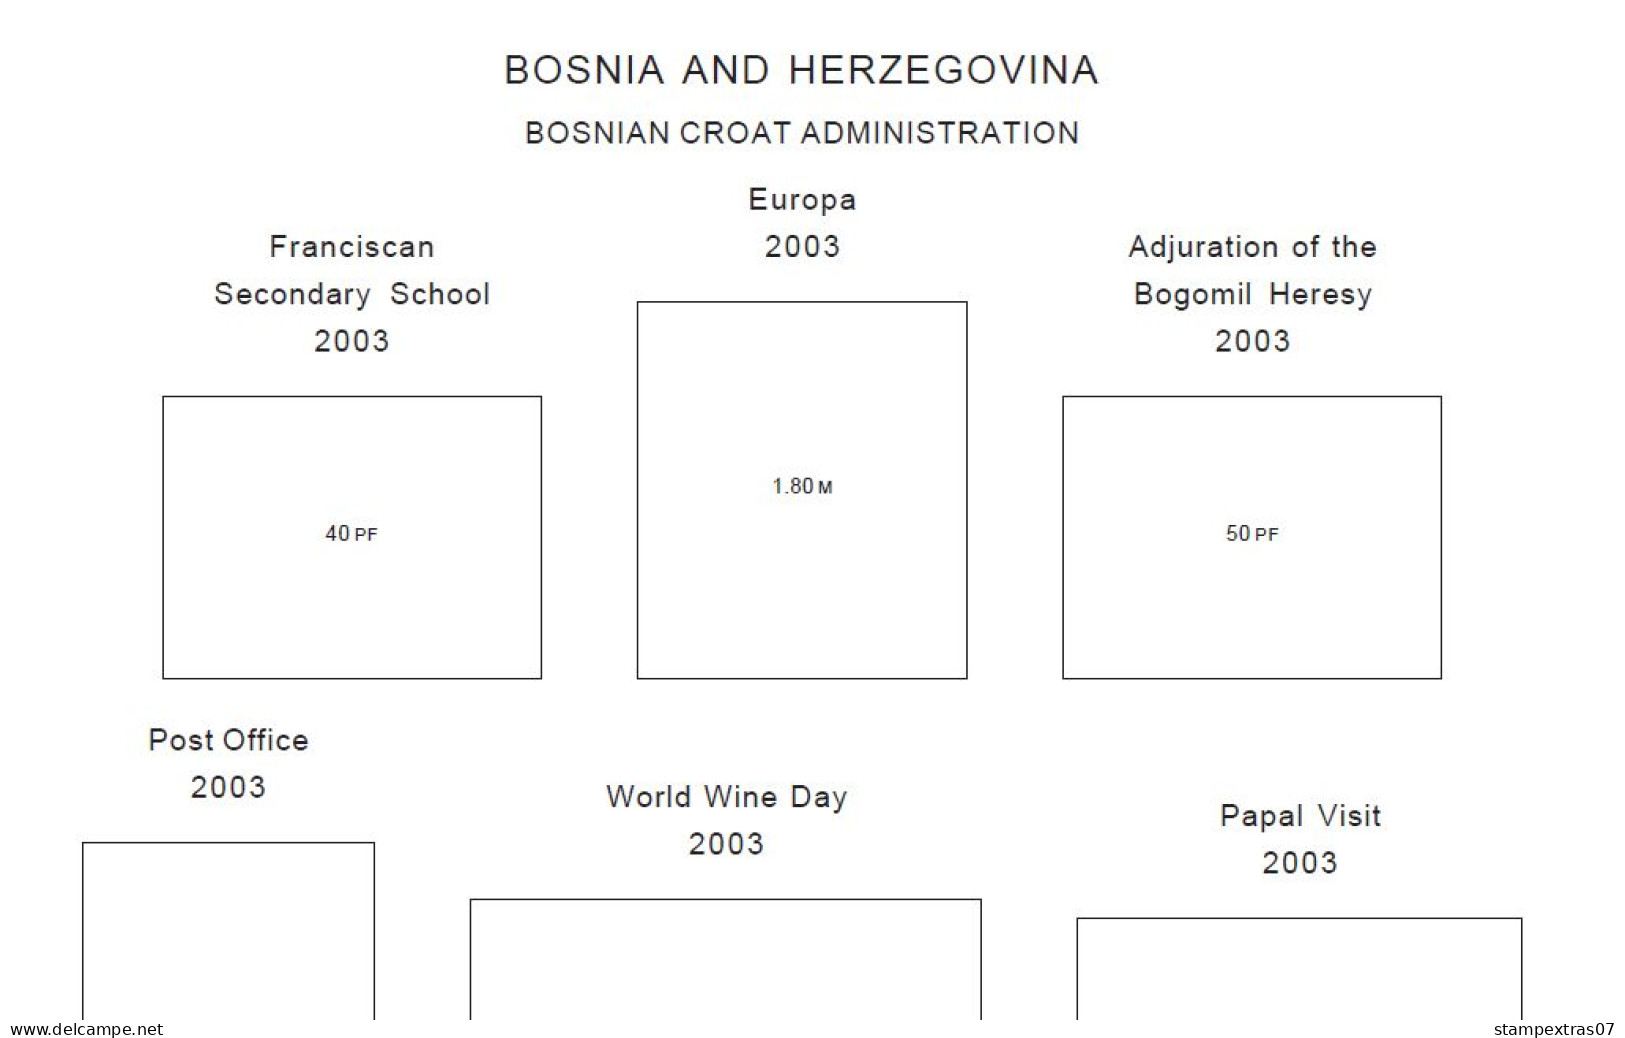 BOSNIA & HERZEGOVINA STAMP ALBUM PAGES 1879-2011 (218 pages)